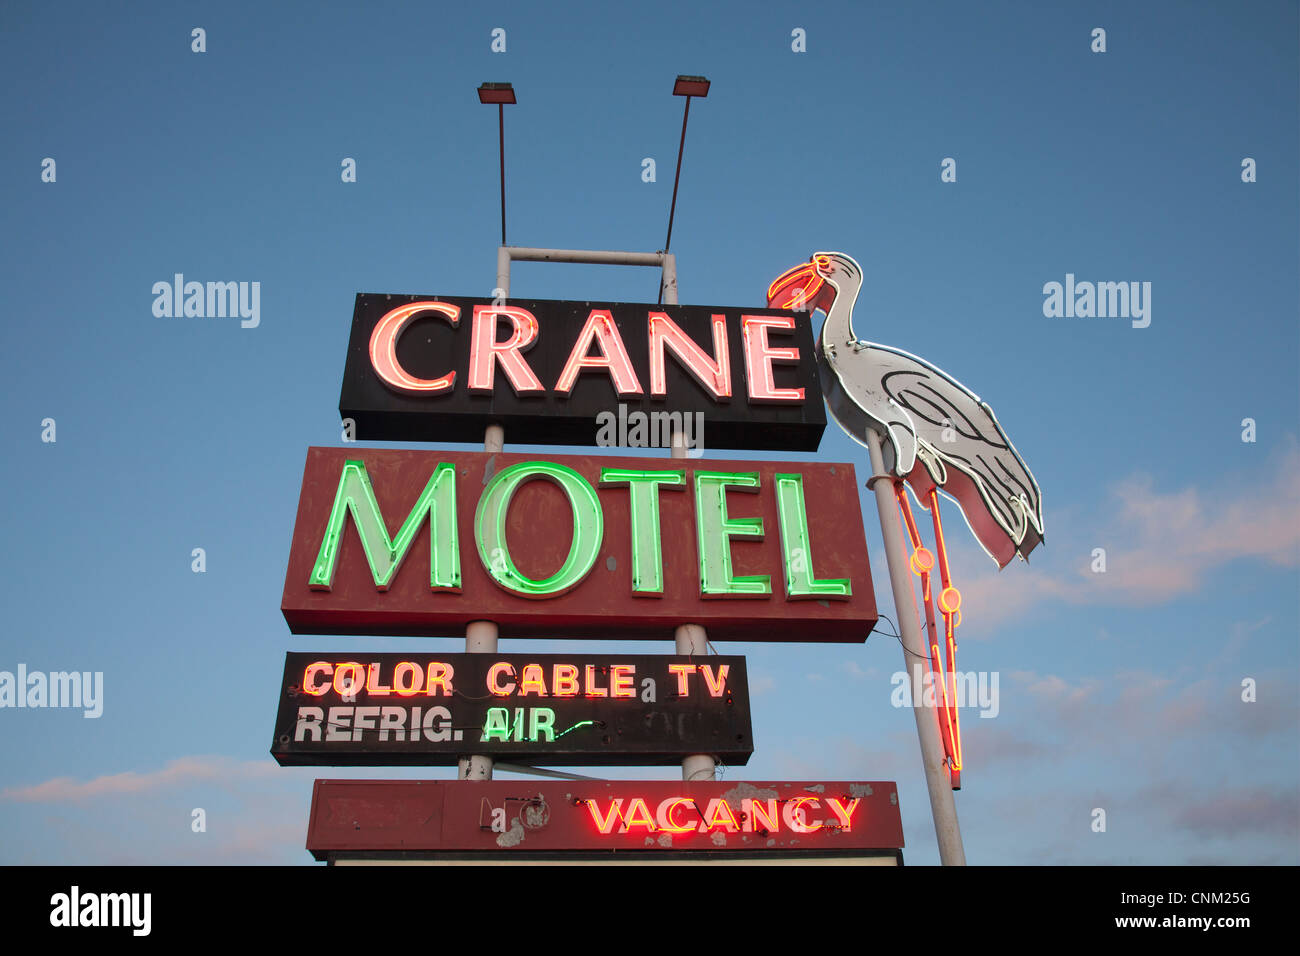 Crane Motel sign, Roswell, New Mexico. Stock Photo